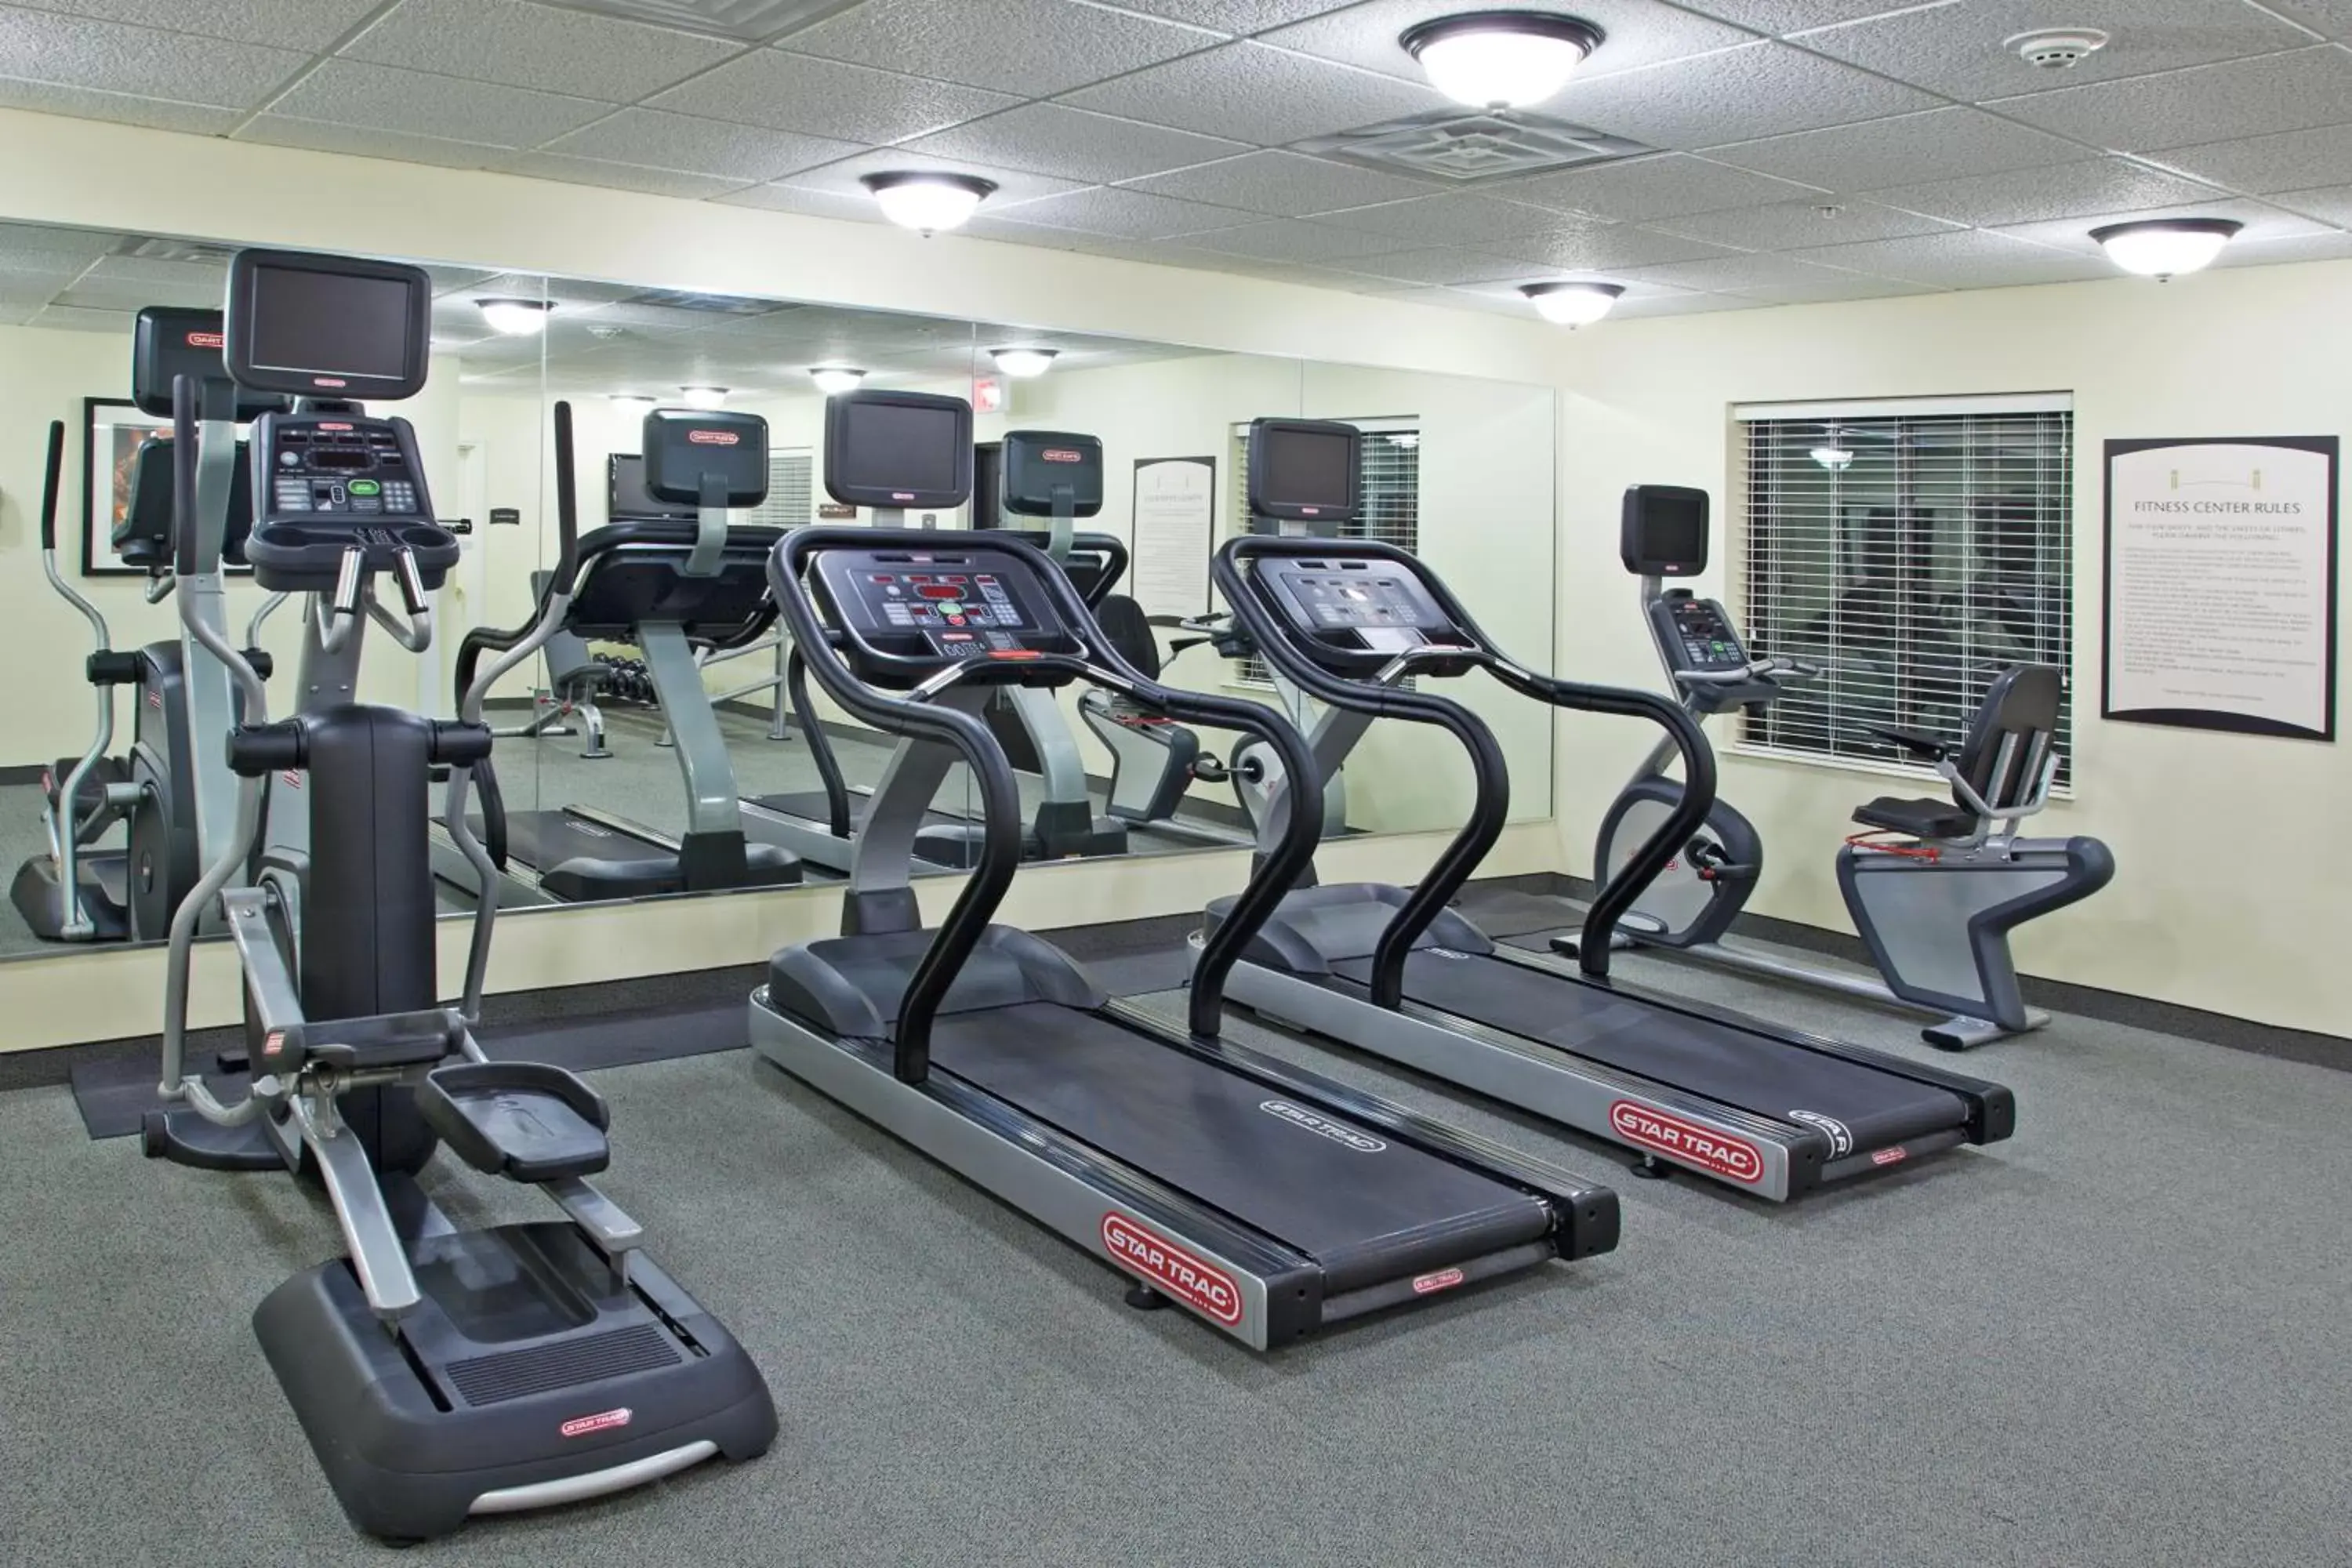 Fitness centre/facilities, Fitness Center/Facilities in Staybridge Suites Akron-Stow-Cuyahoga Falls, an IHG Hotel